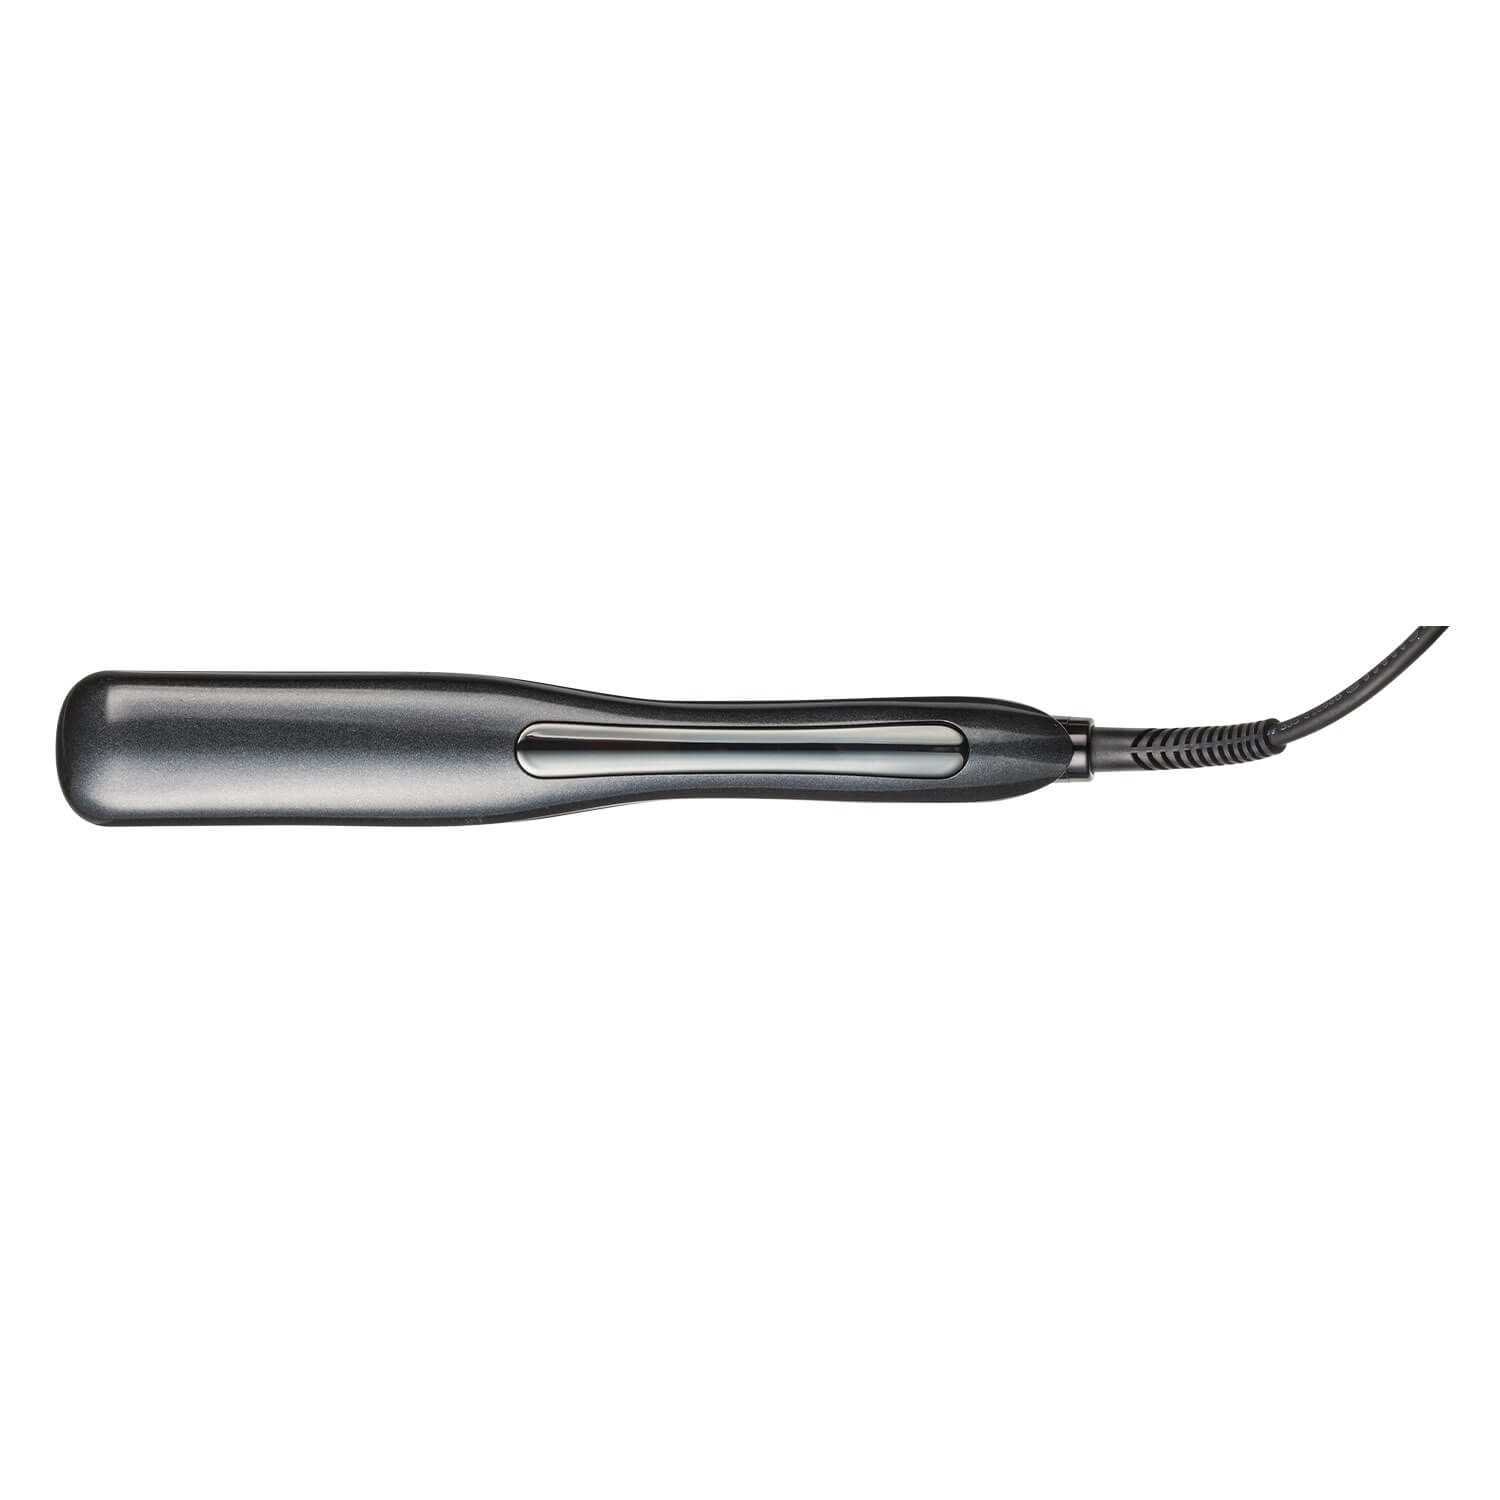 Product image from HH Simonsen Electricals - ROD Curling Iron vs6 Crimping